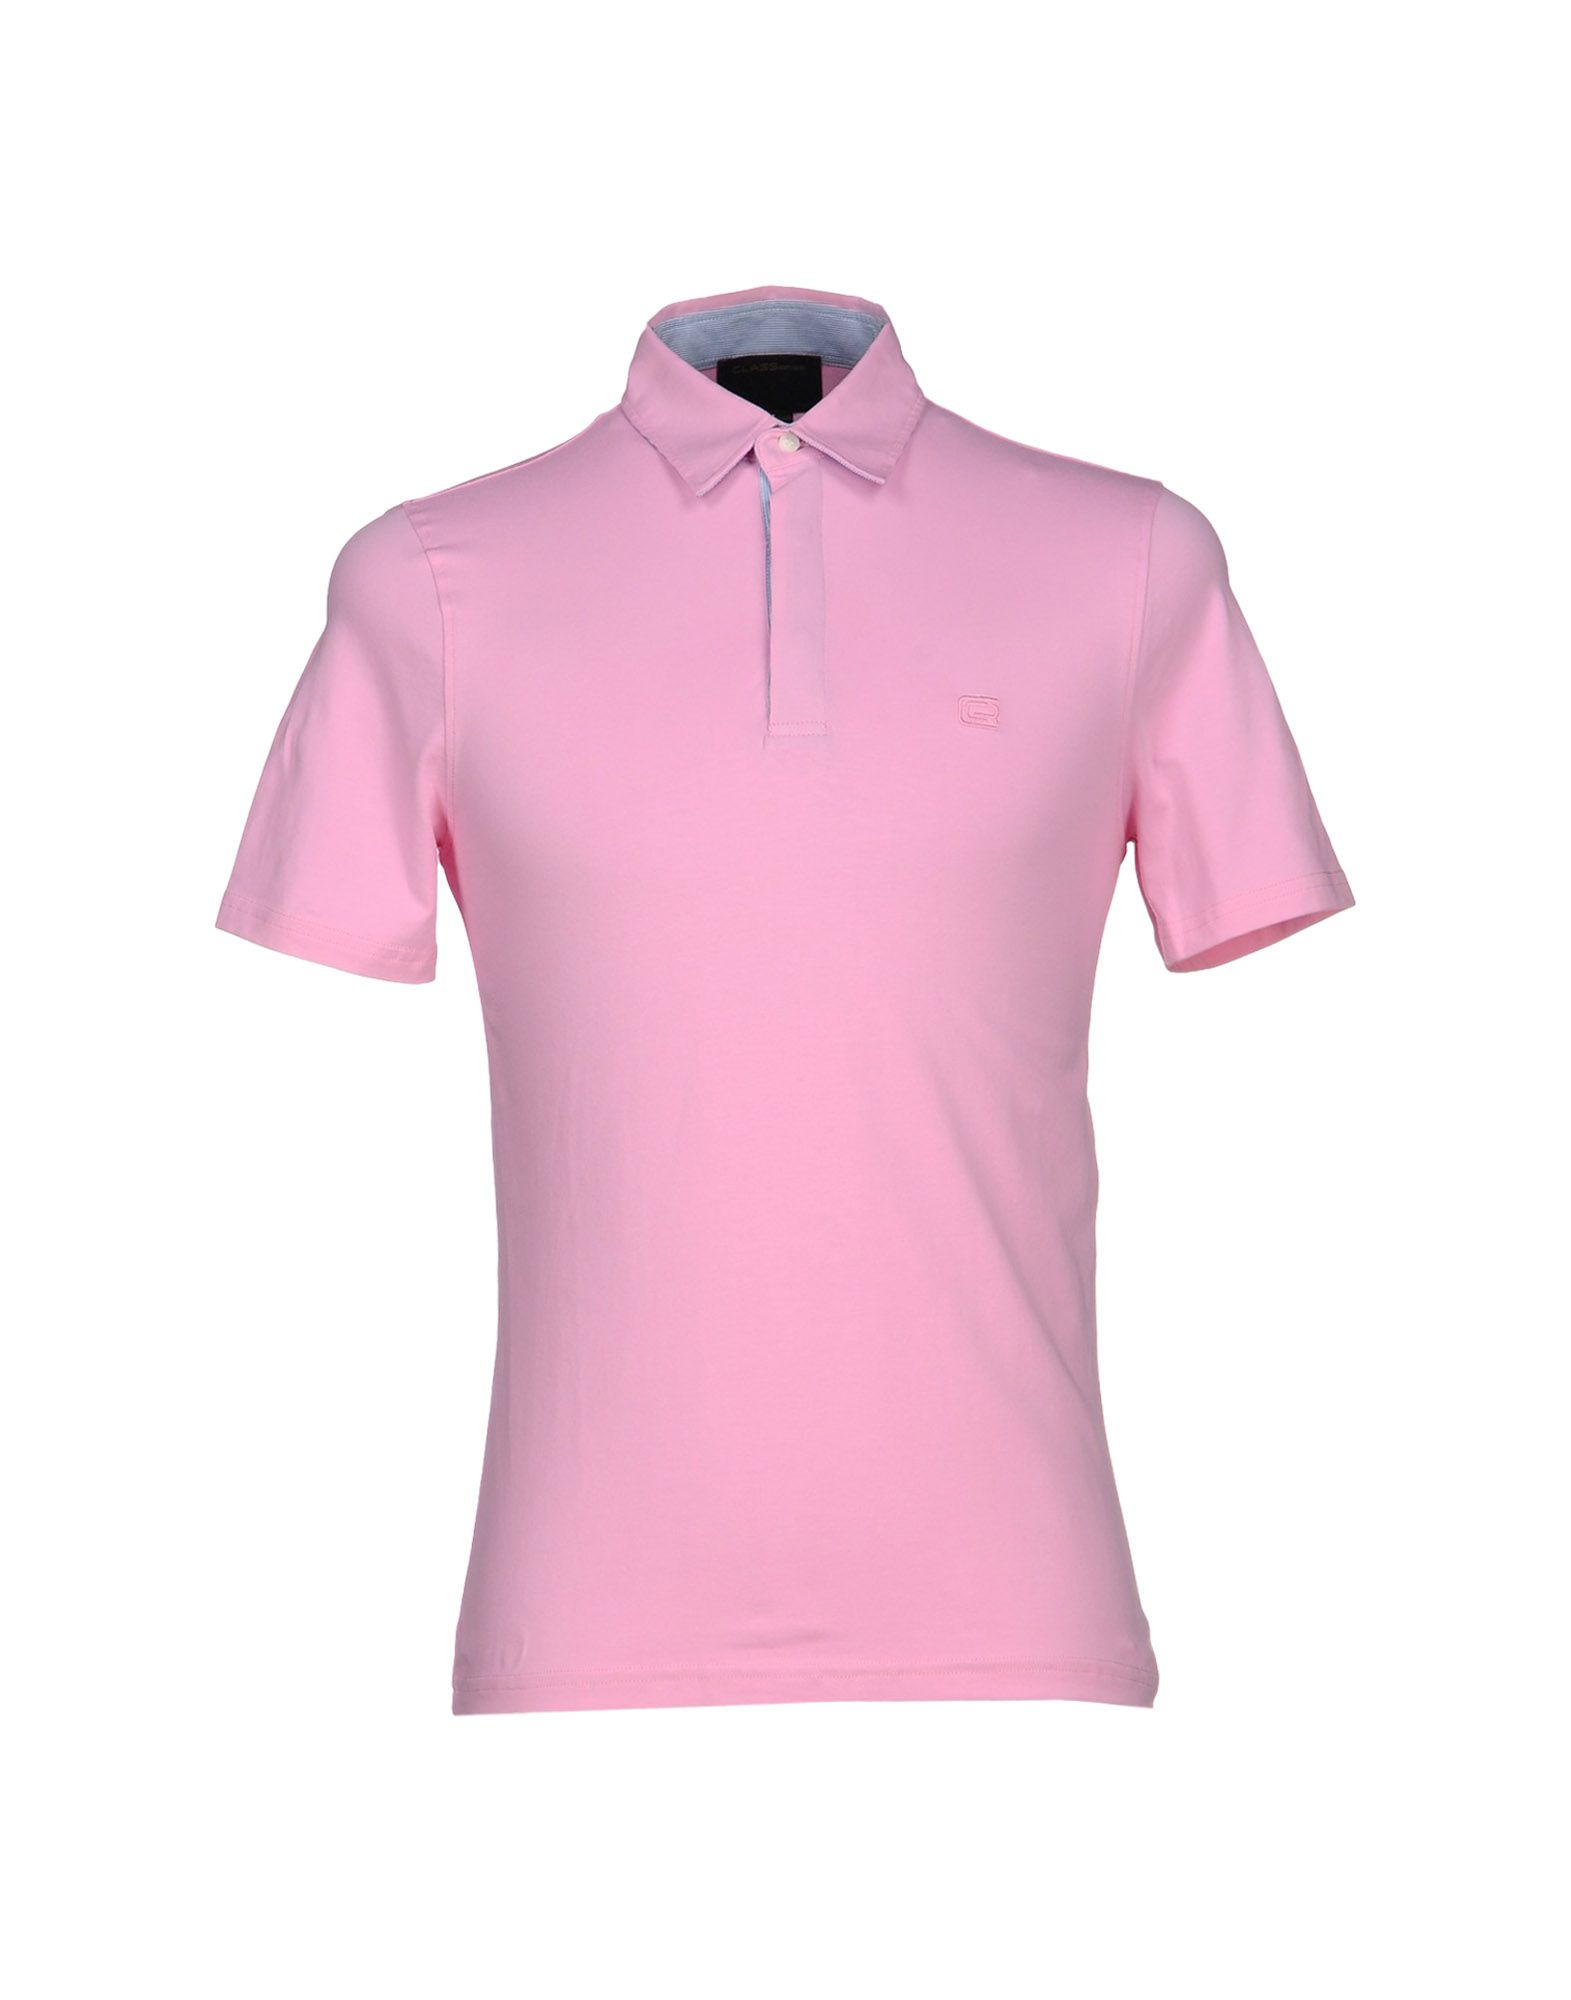 Lyst - Class Roberto Cavalli Polo Shirt in Pink for Men